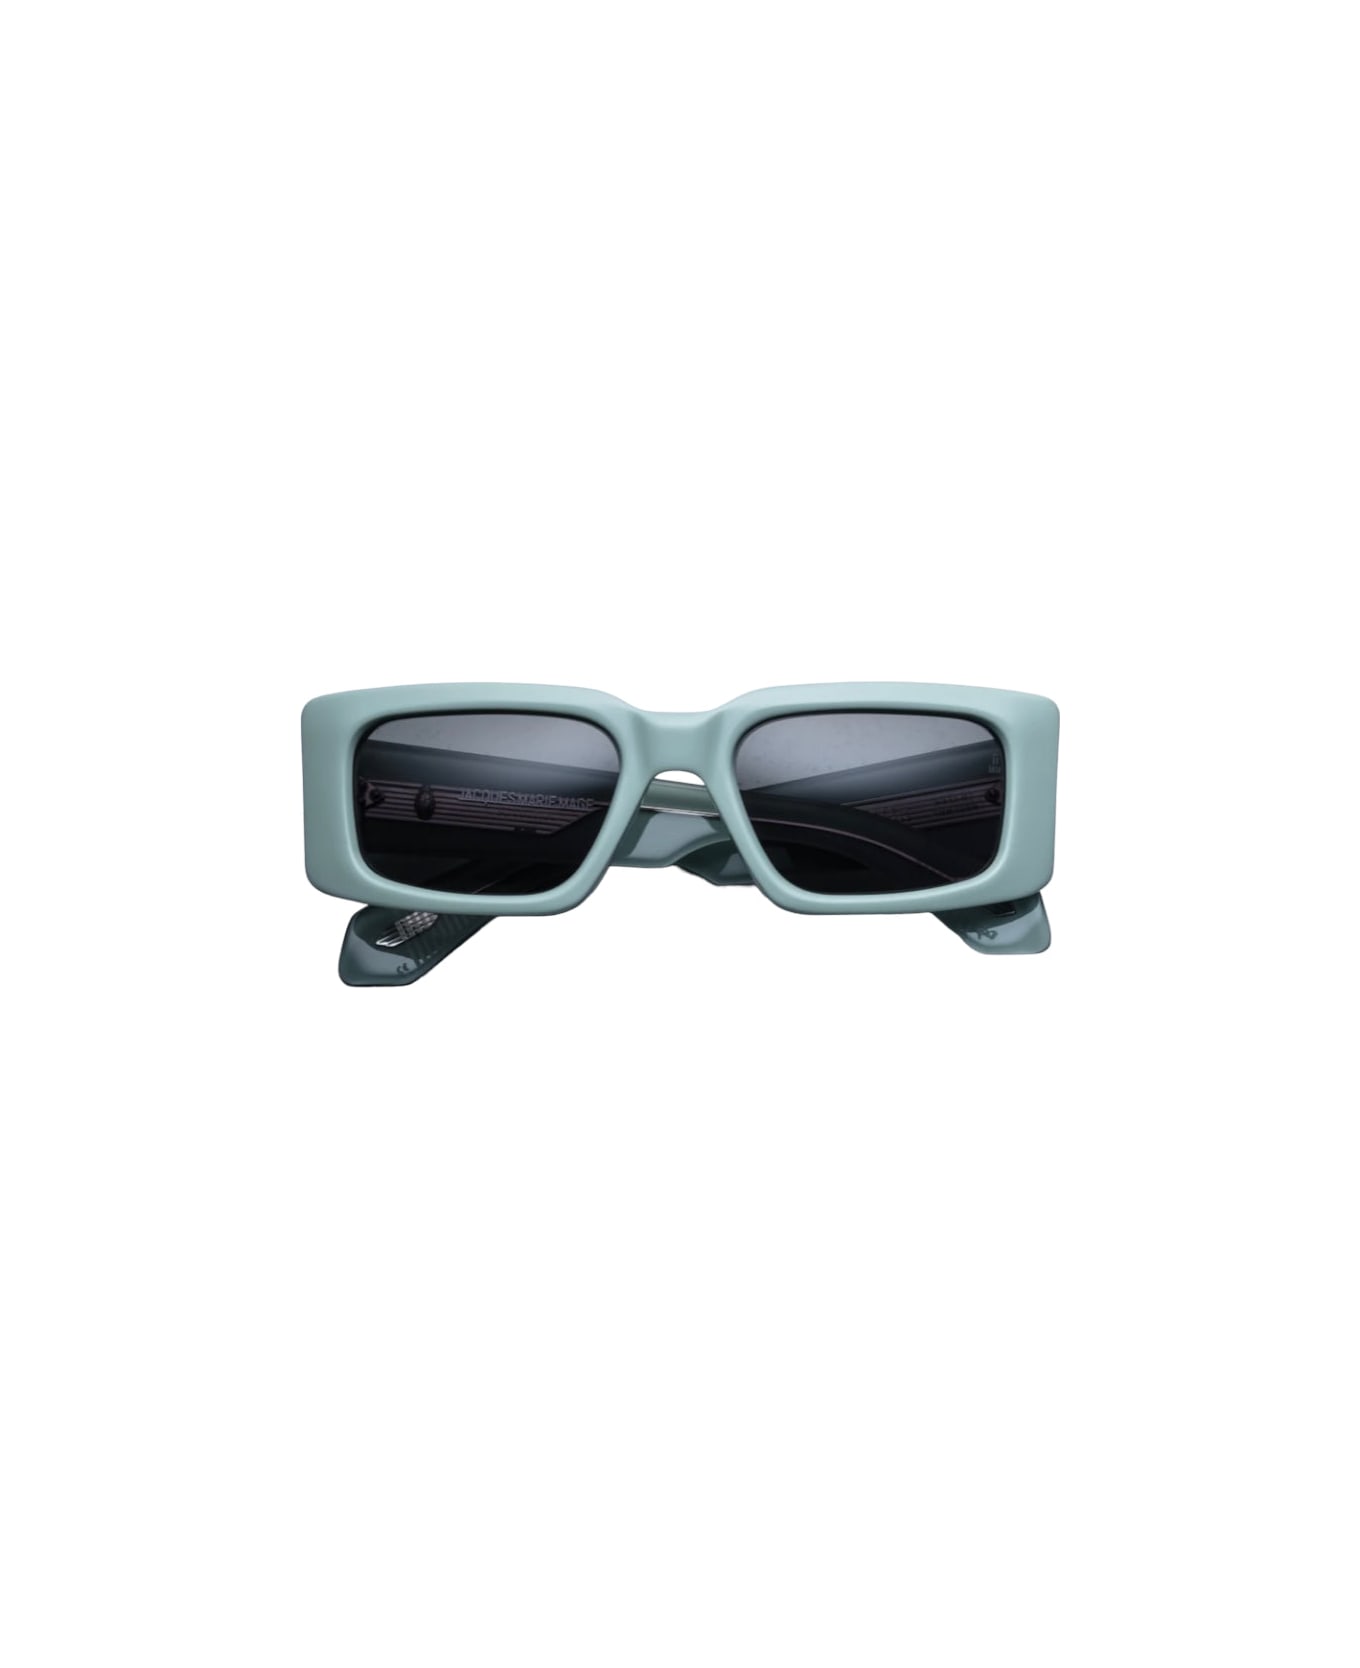 Jacques Marie Mage Supersonic - Glassier Sunglasses